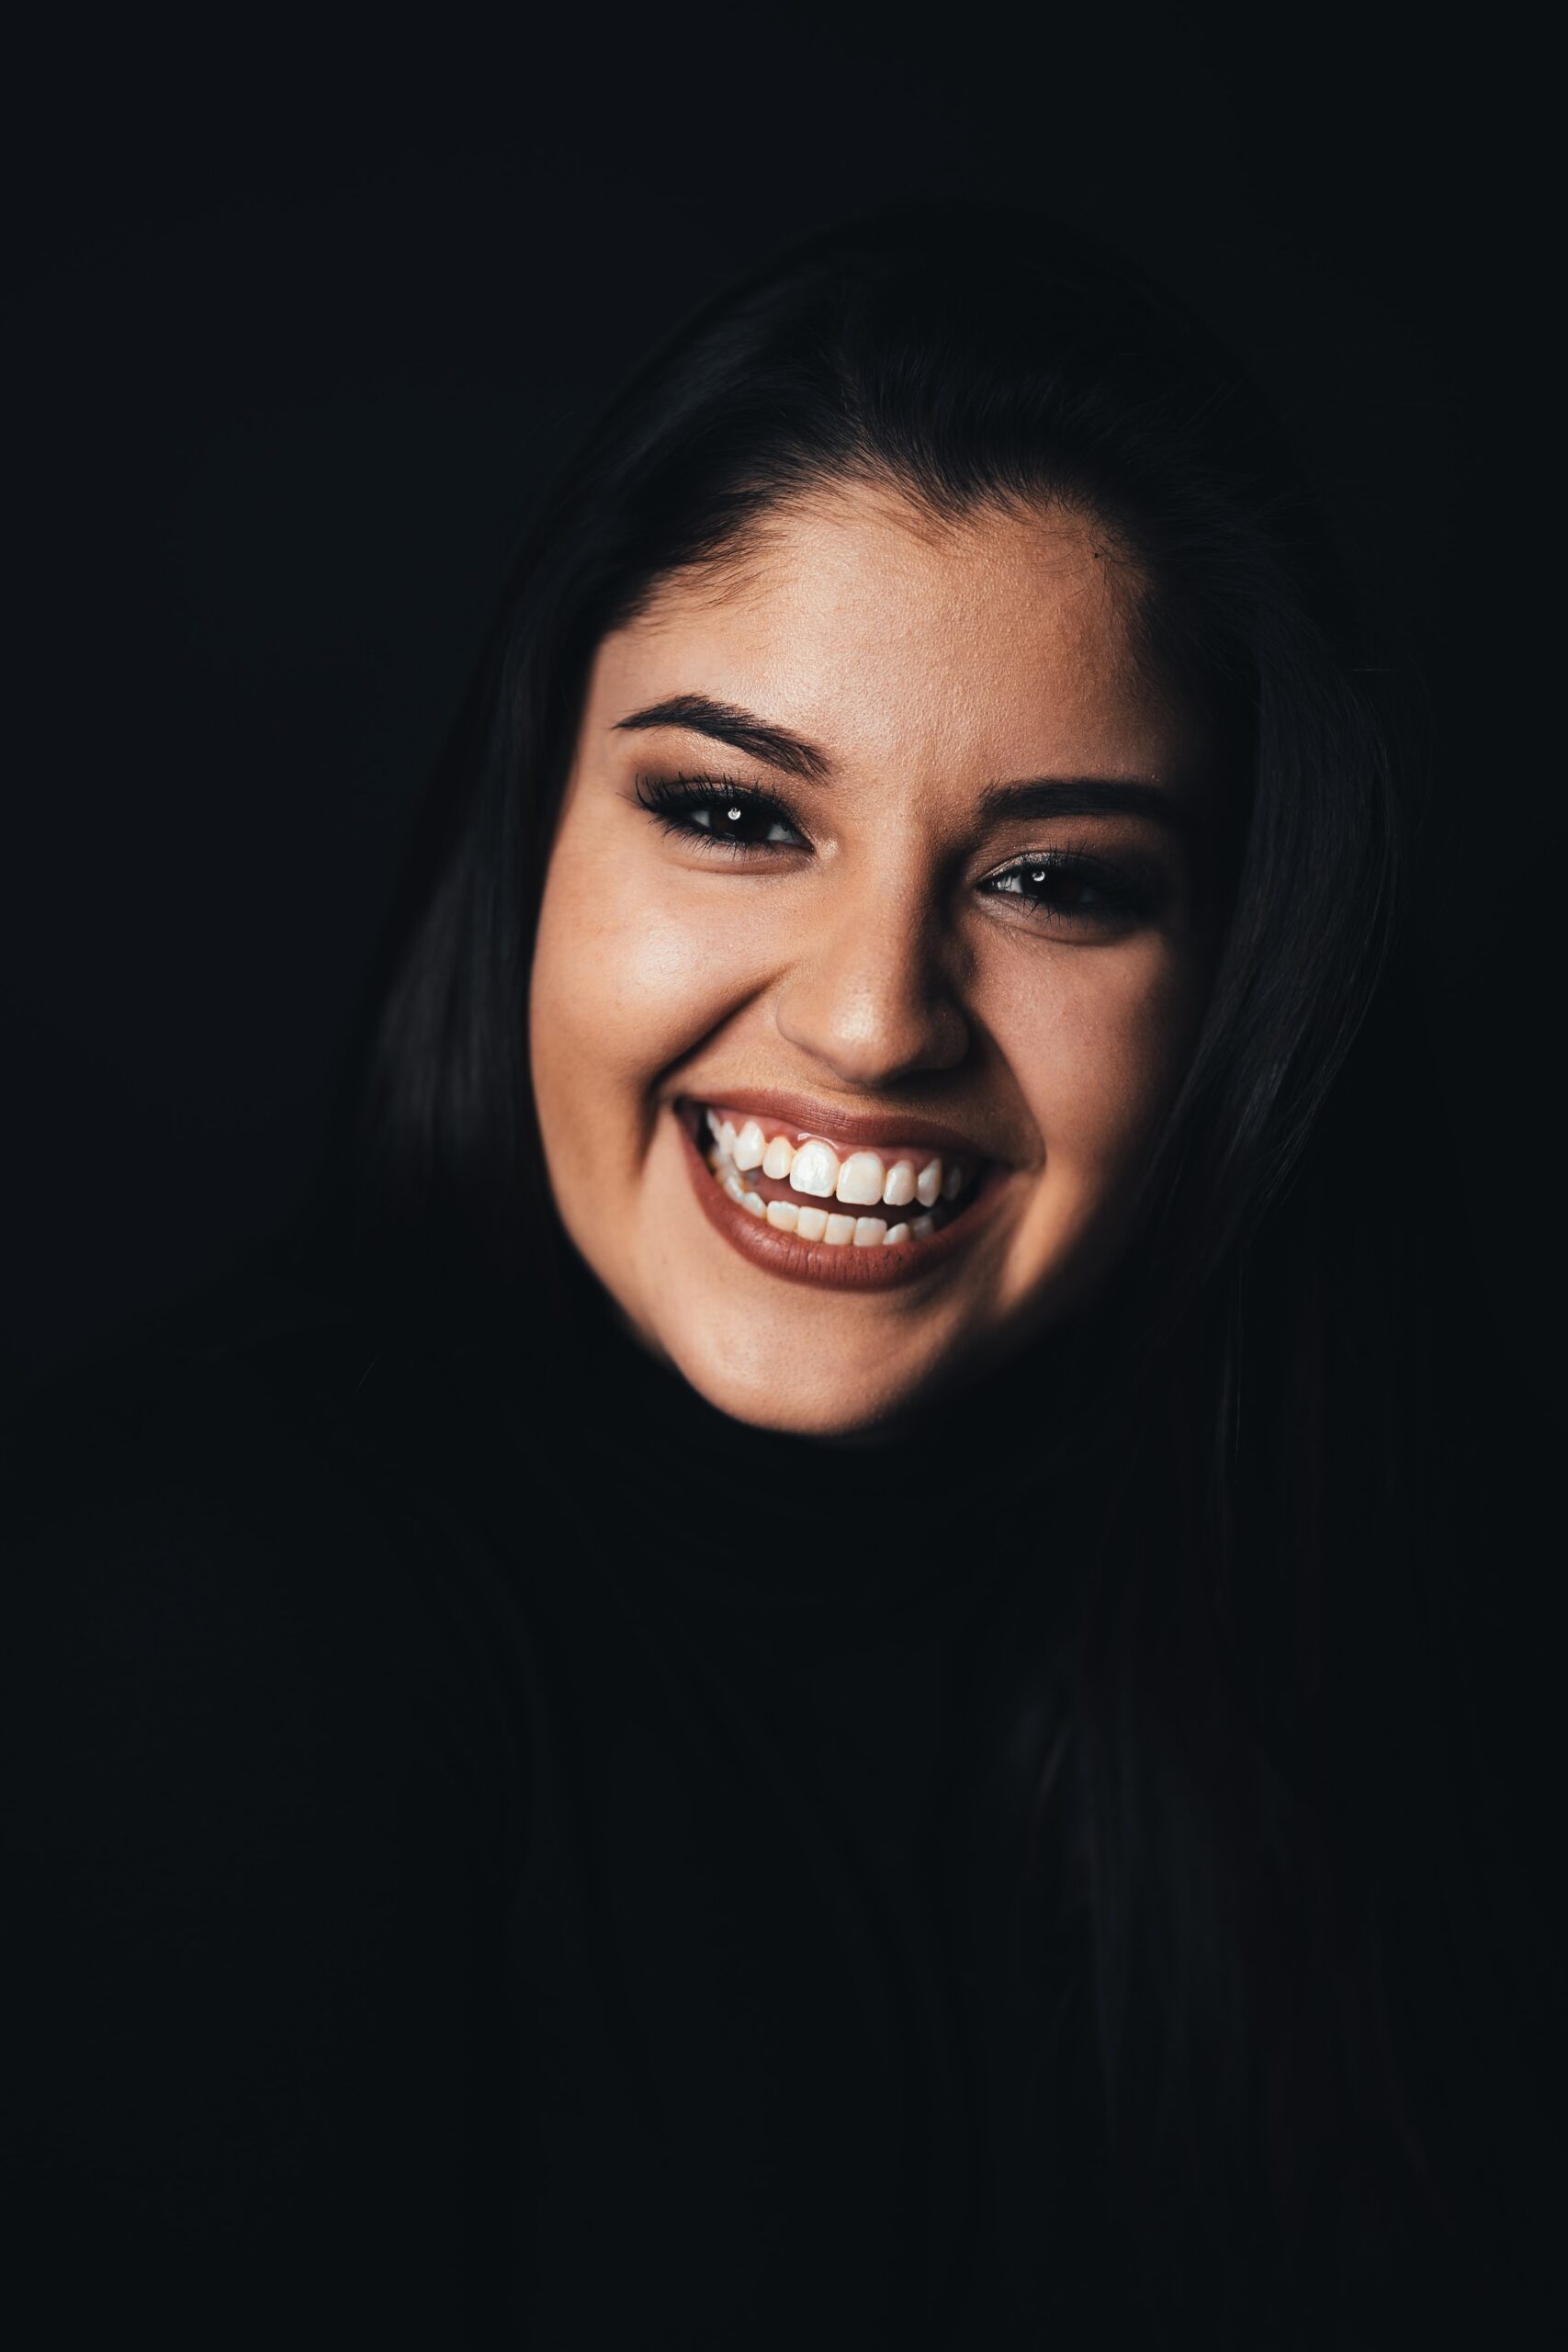 Woman with a bright smile, enhanced by her dentist in Dallas, posing against a dark background.